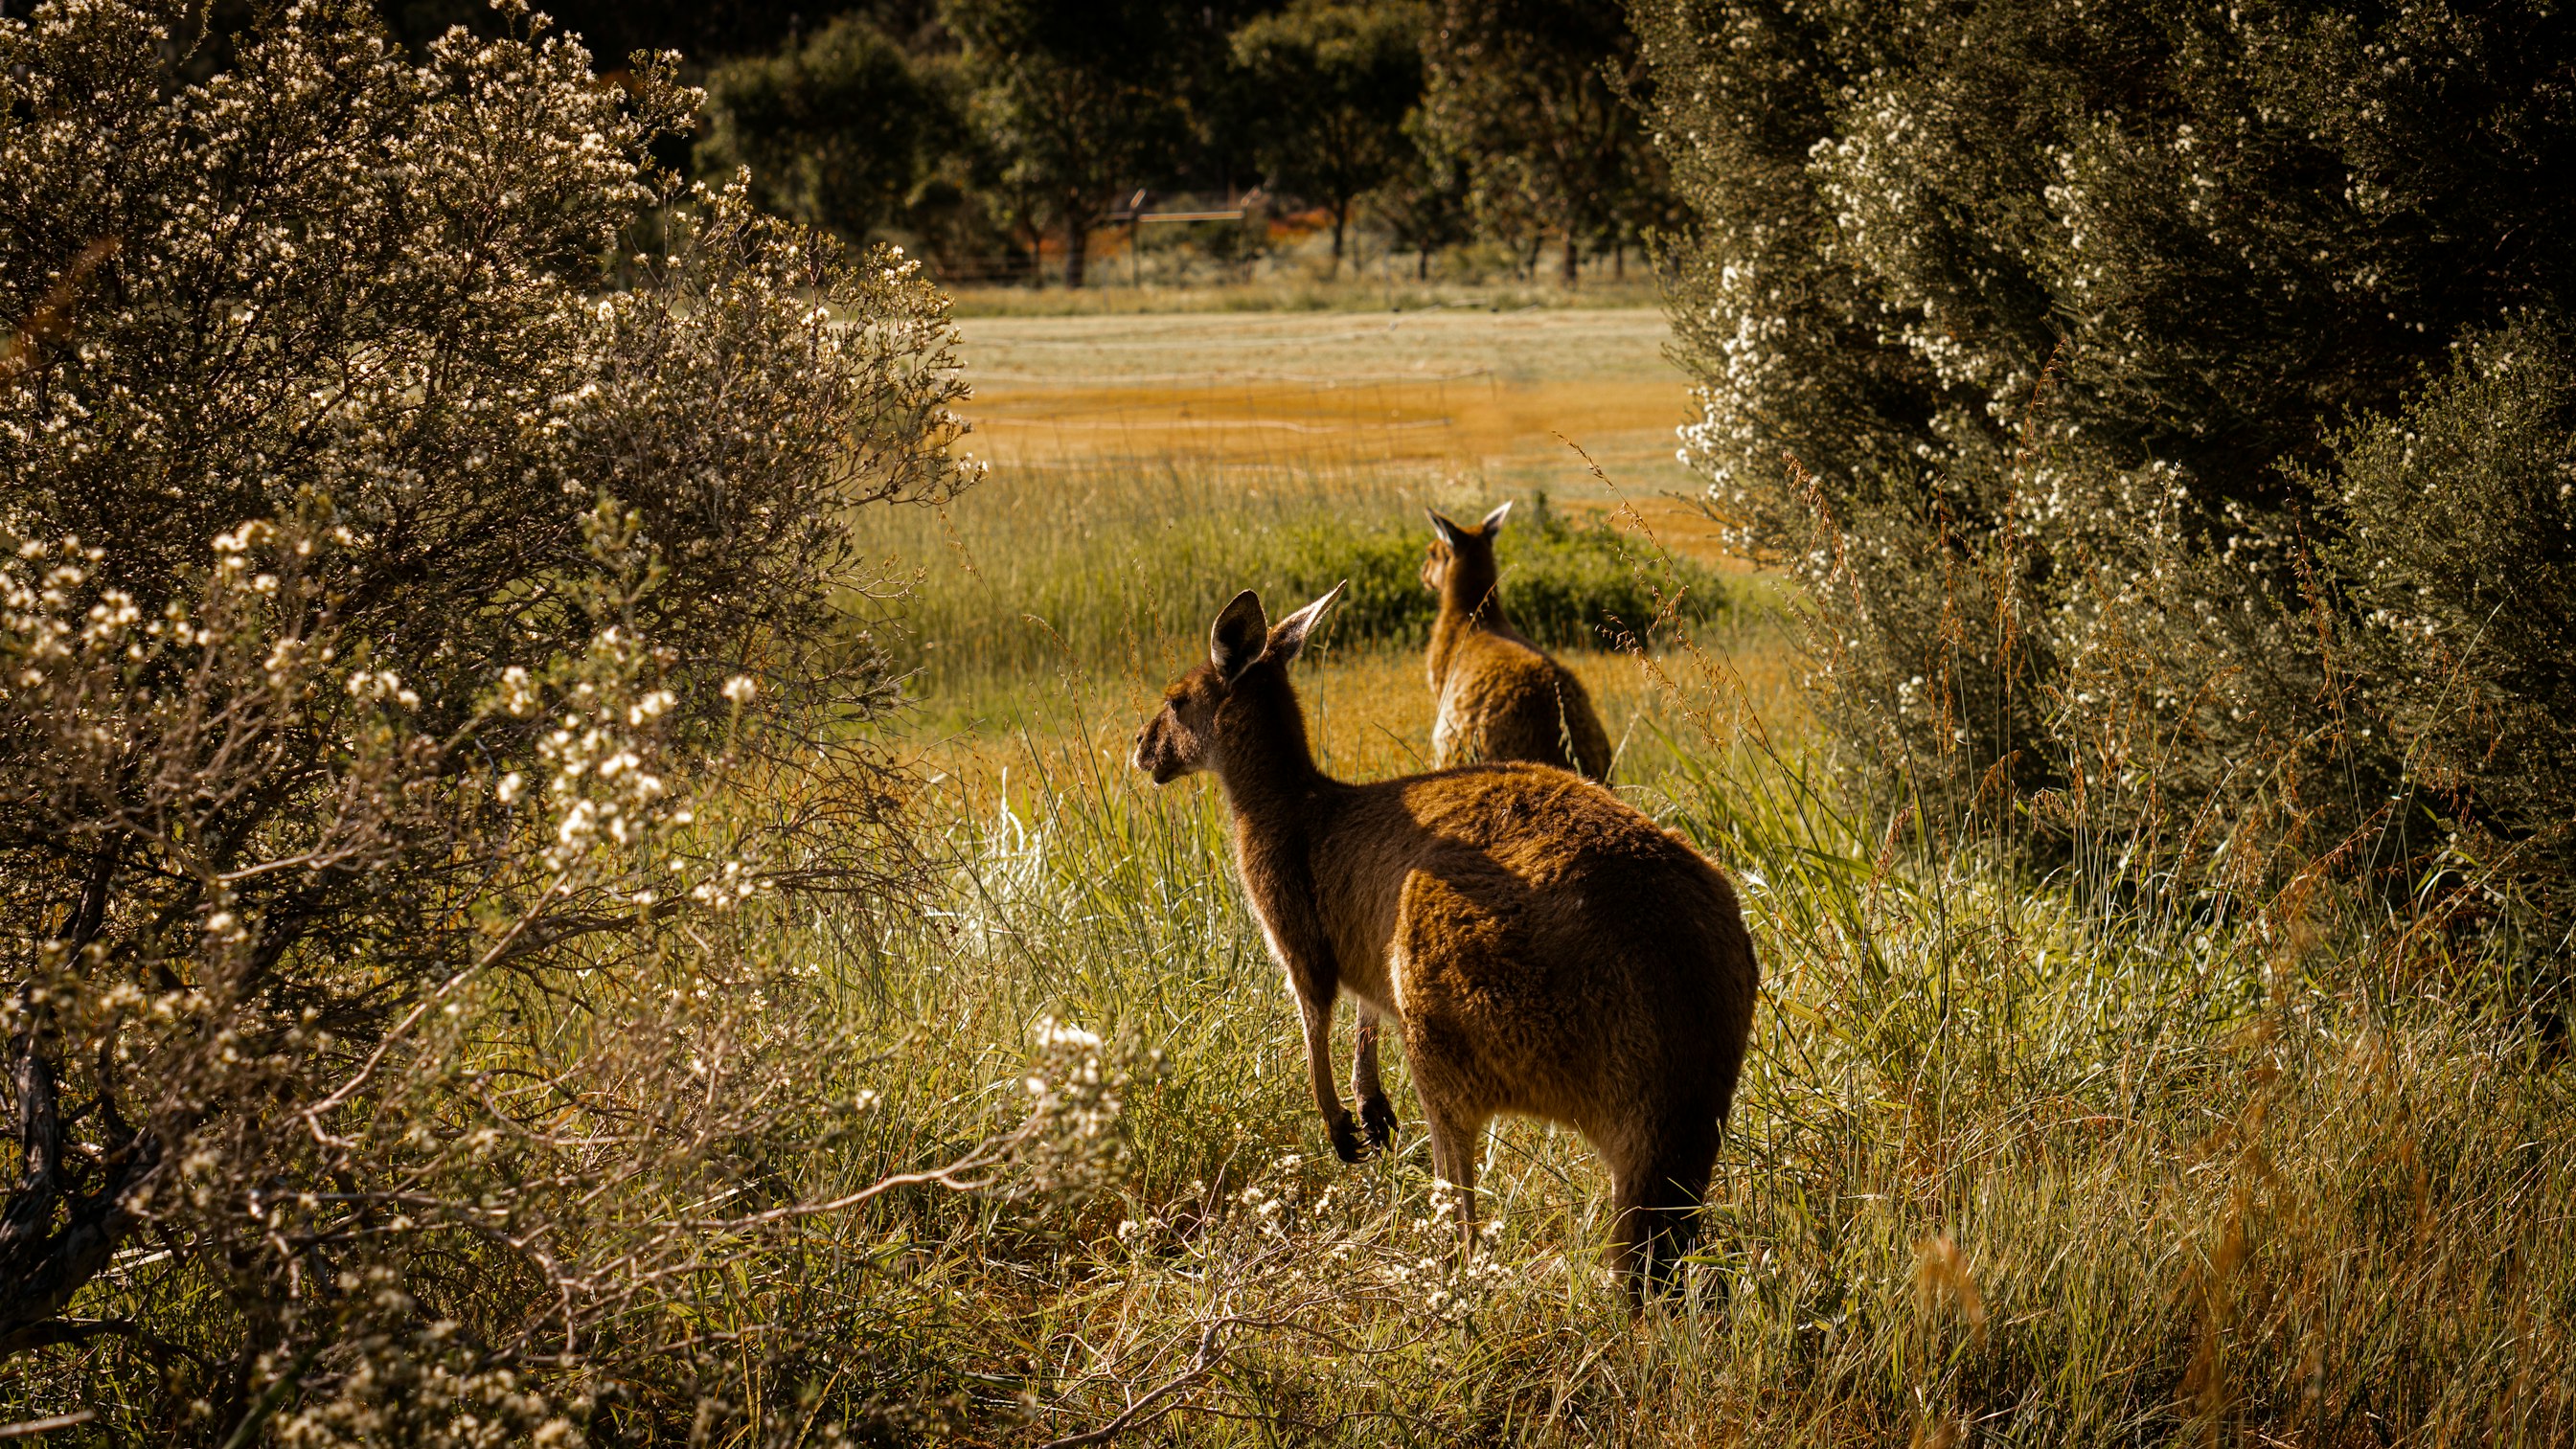 kangaroo - Places To Go in Perth